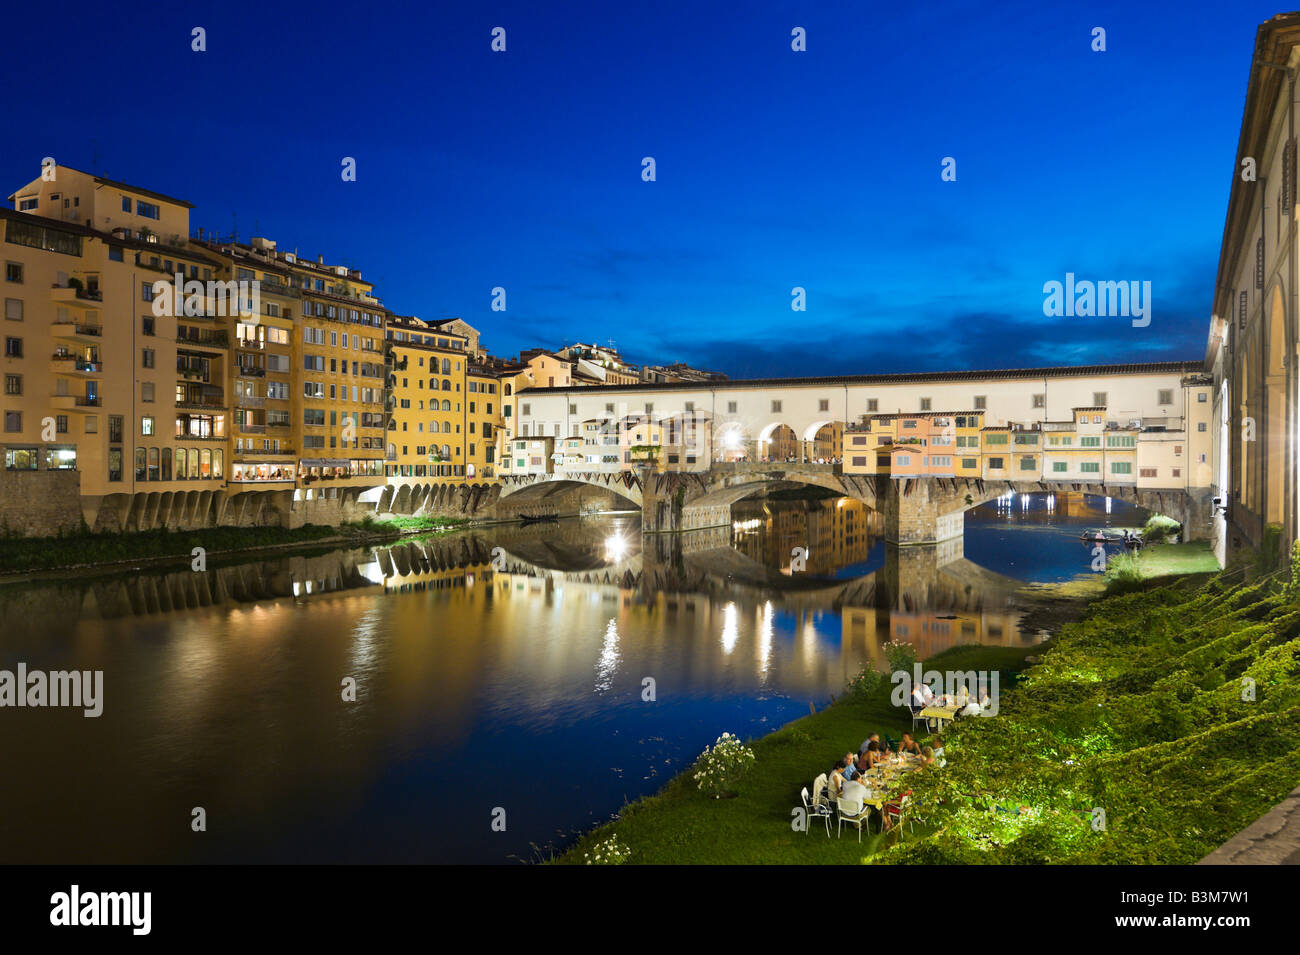 Ponte Vecchio and River Arno at Night, Florence, Tuscany, Italy Stock Photo